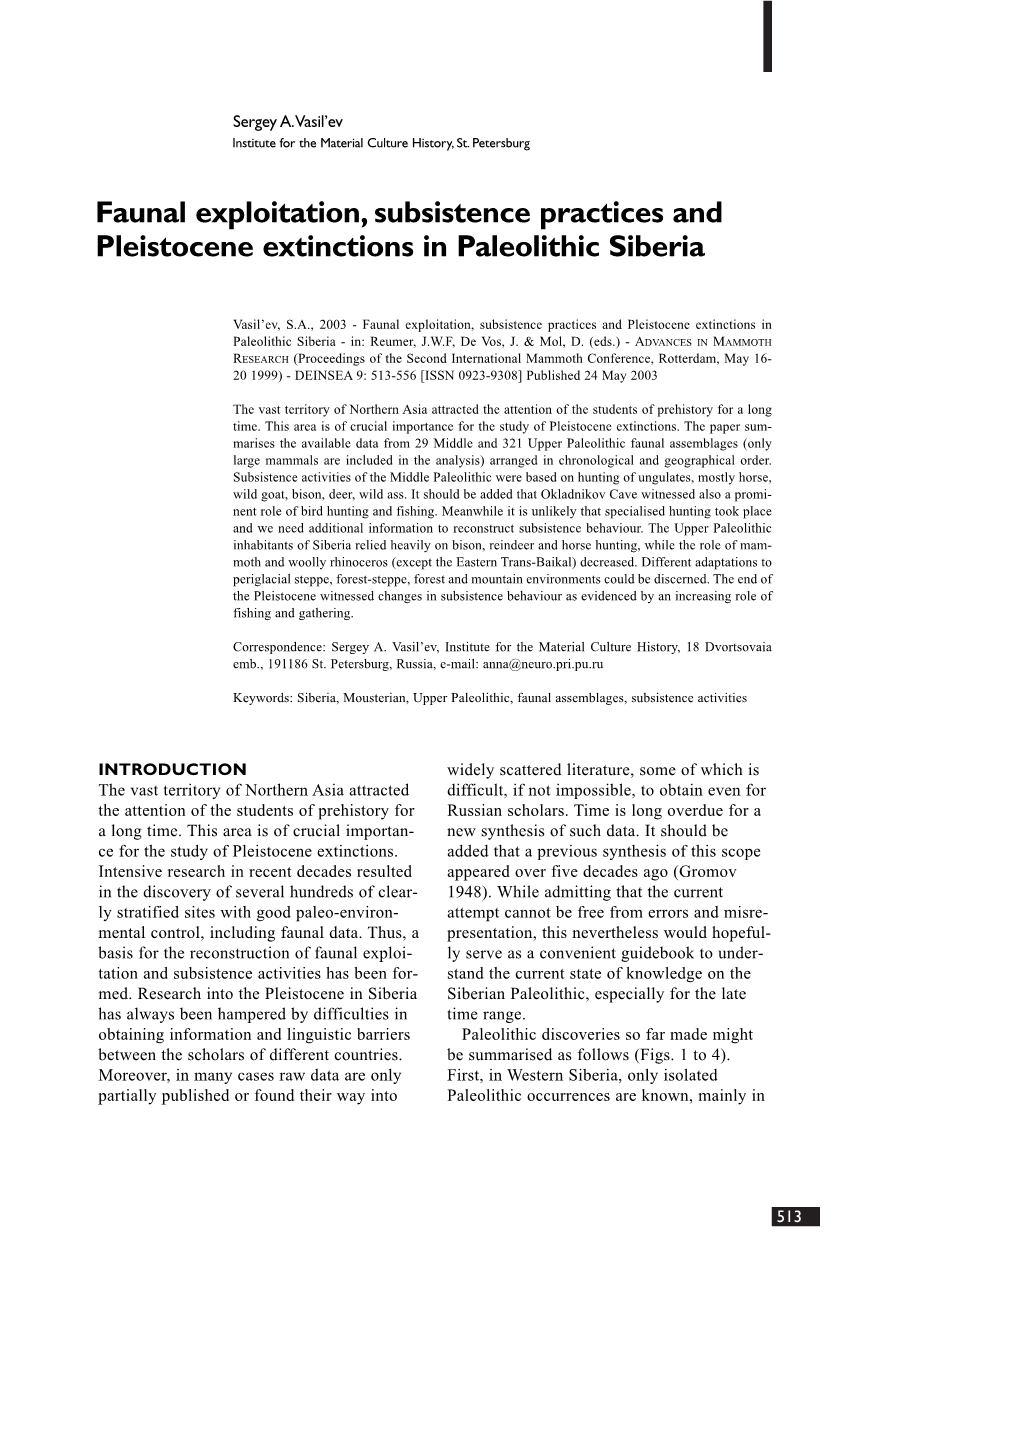 Faunal Exploitation, Subsistence Practices and Pleistocene Extinctions in Paleolithic Siberia